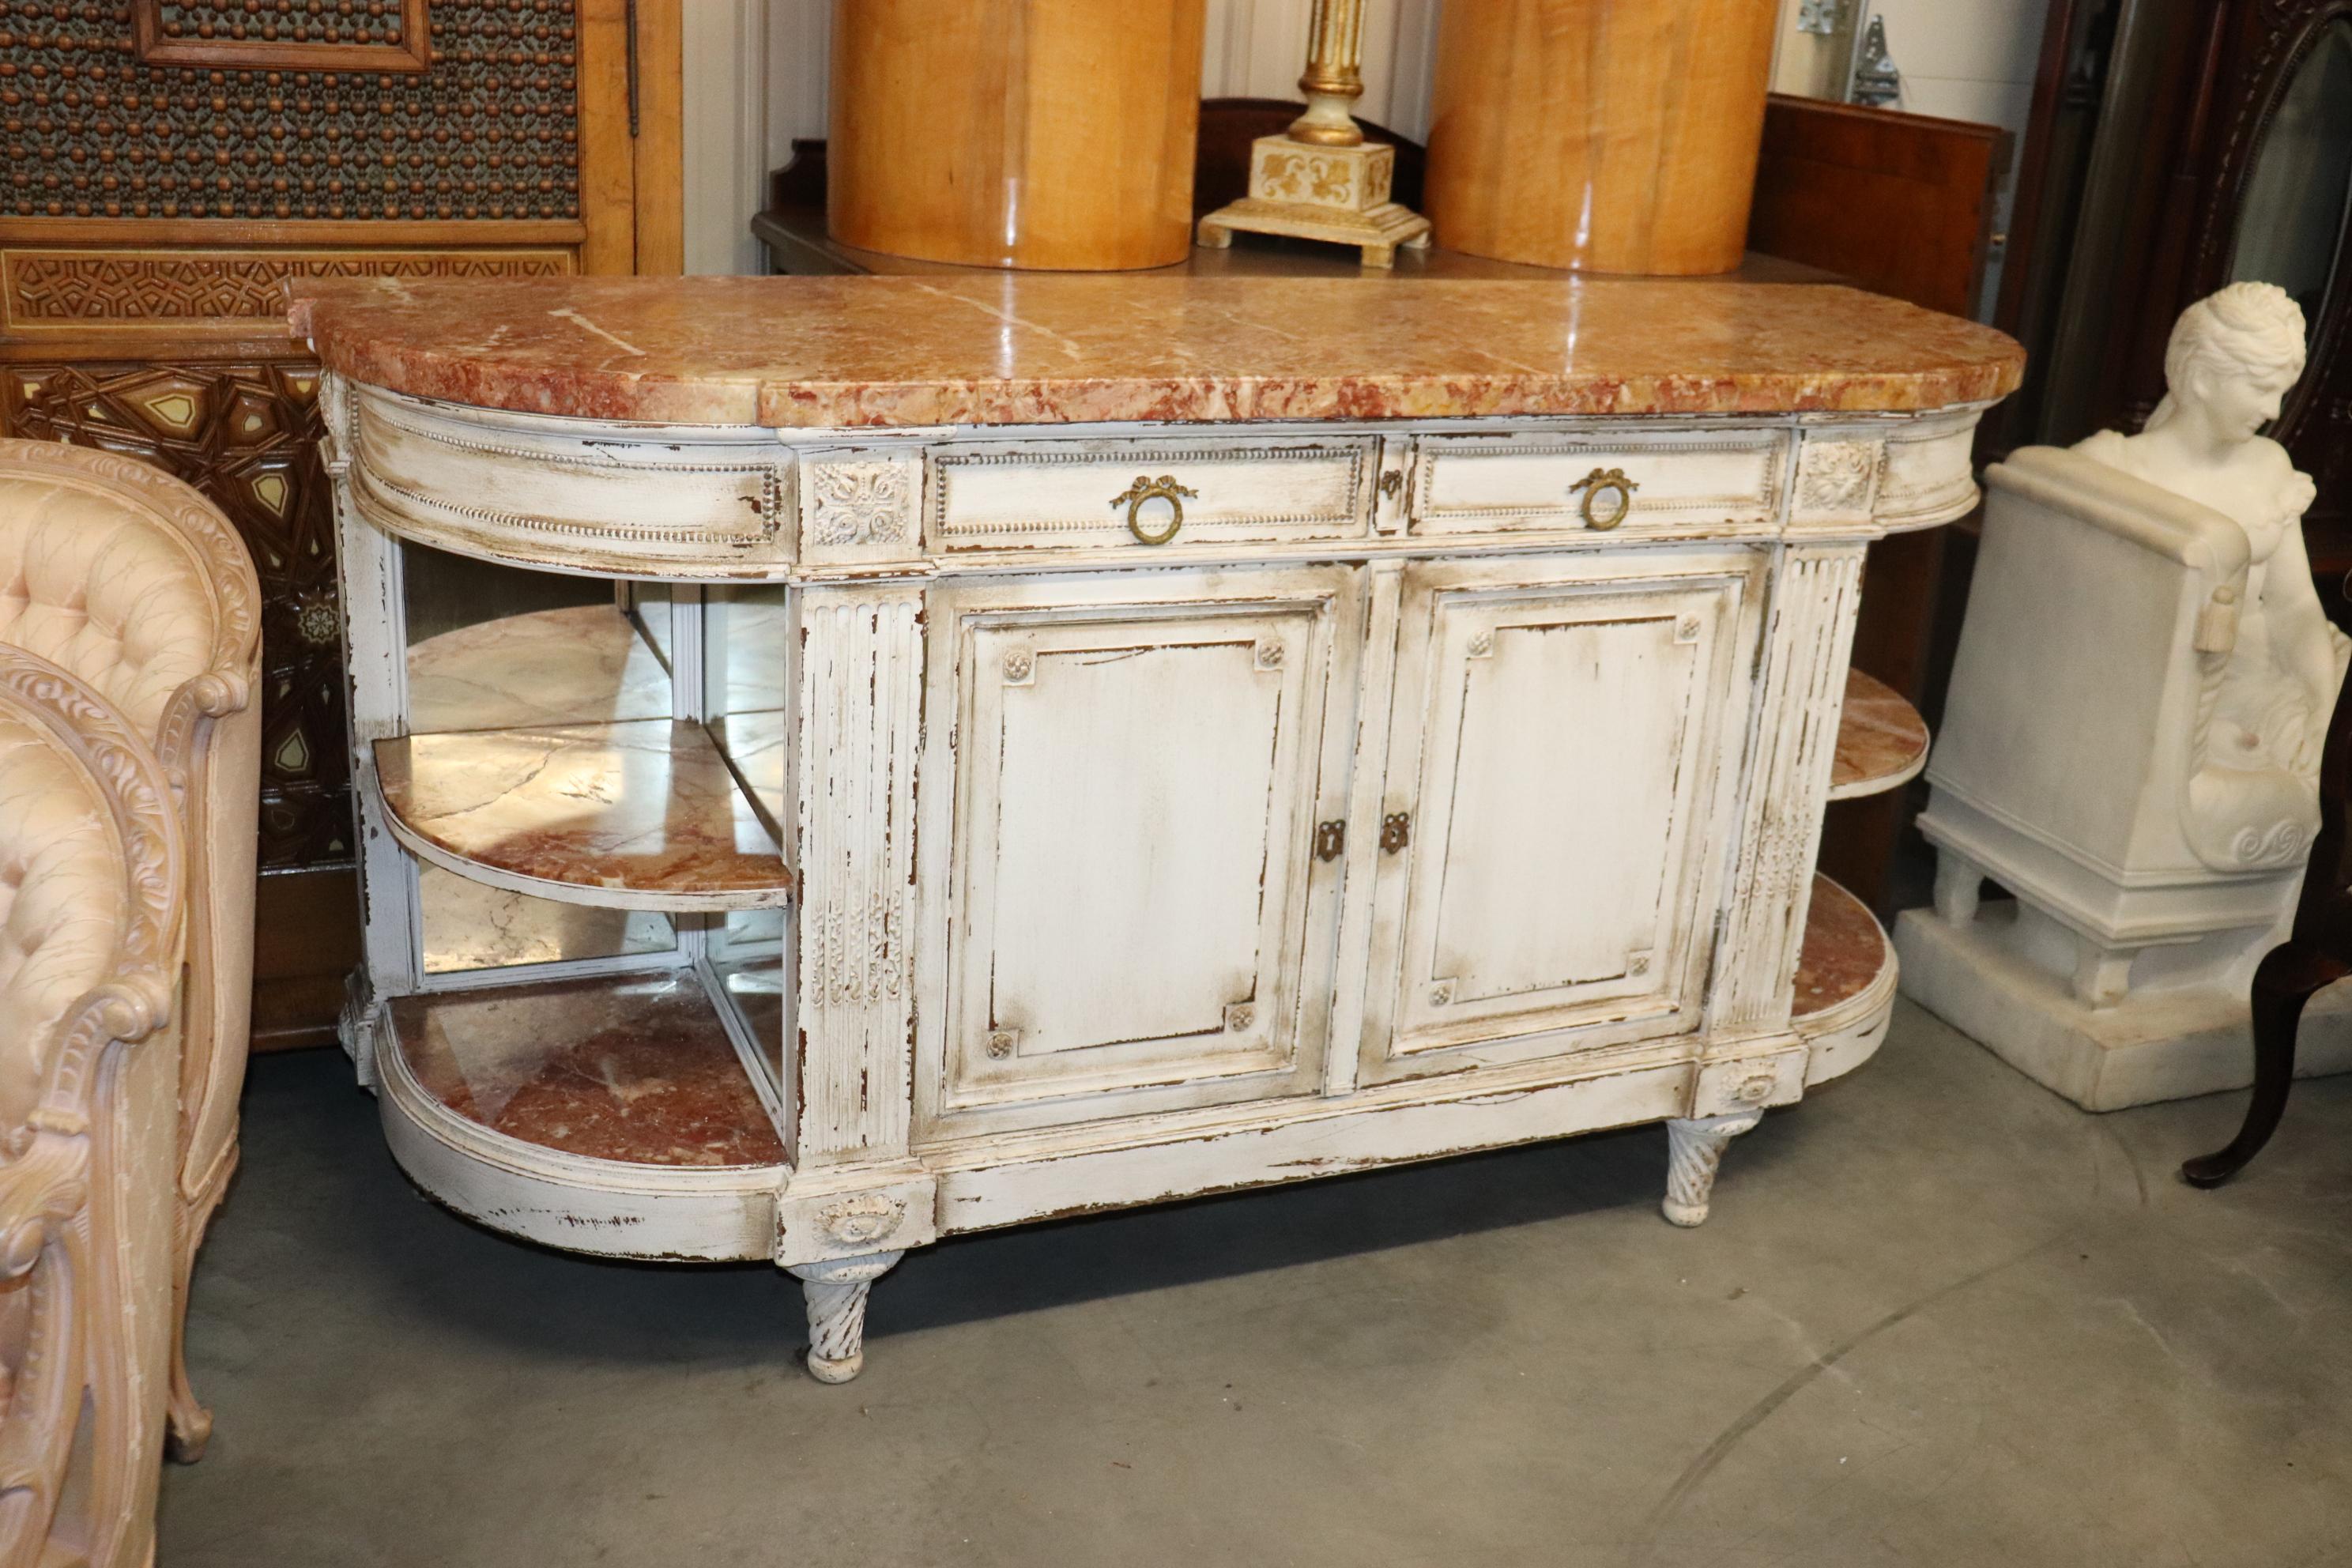 This is a superb antique distressed painted sideboard. The lines, the marble and the color really make a statement and pop! This is impossible to ignore! The marble top is in good condition as is the rest of the case. Notice the shelves are marble